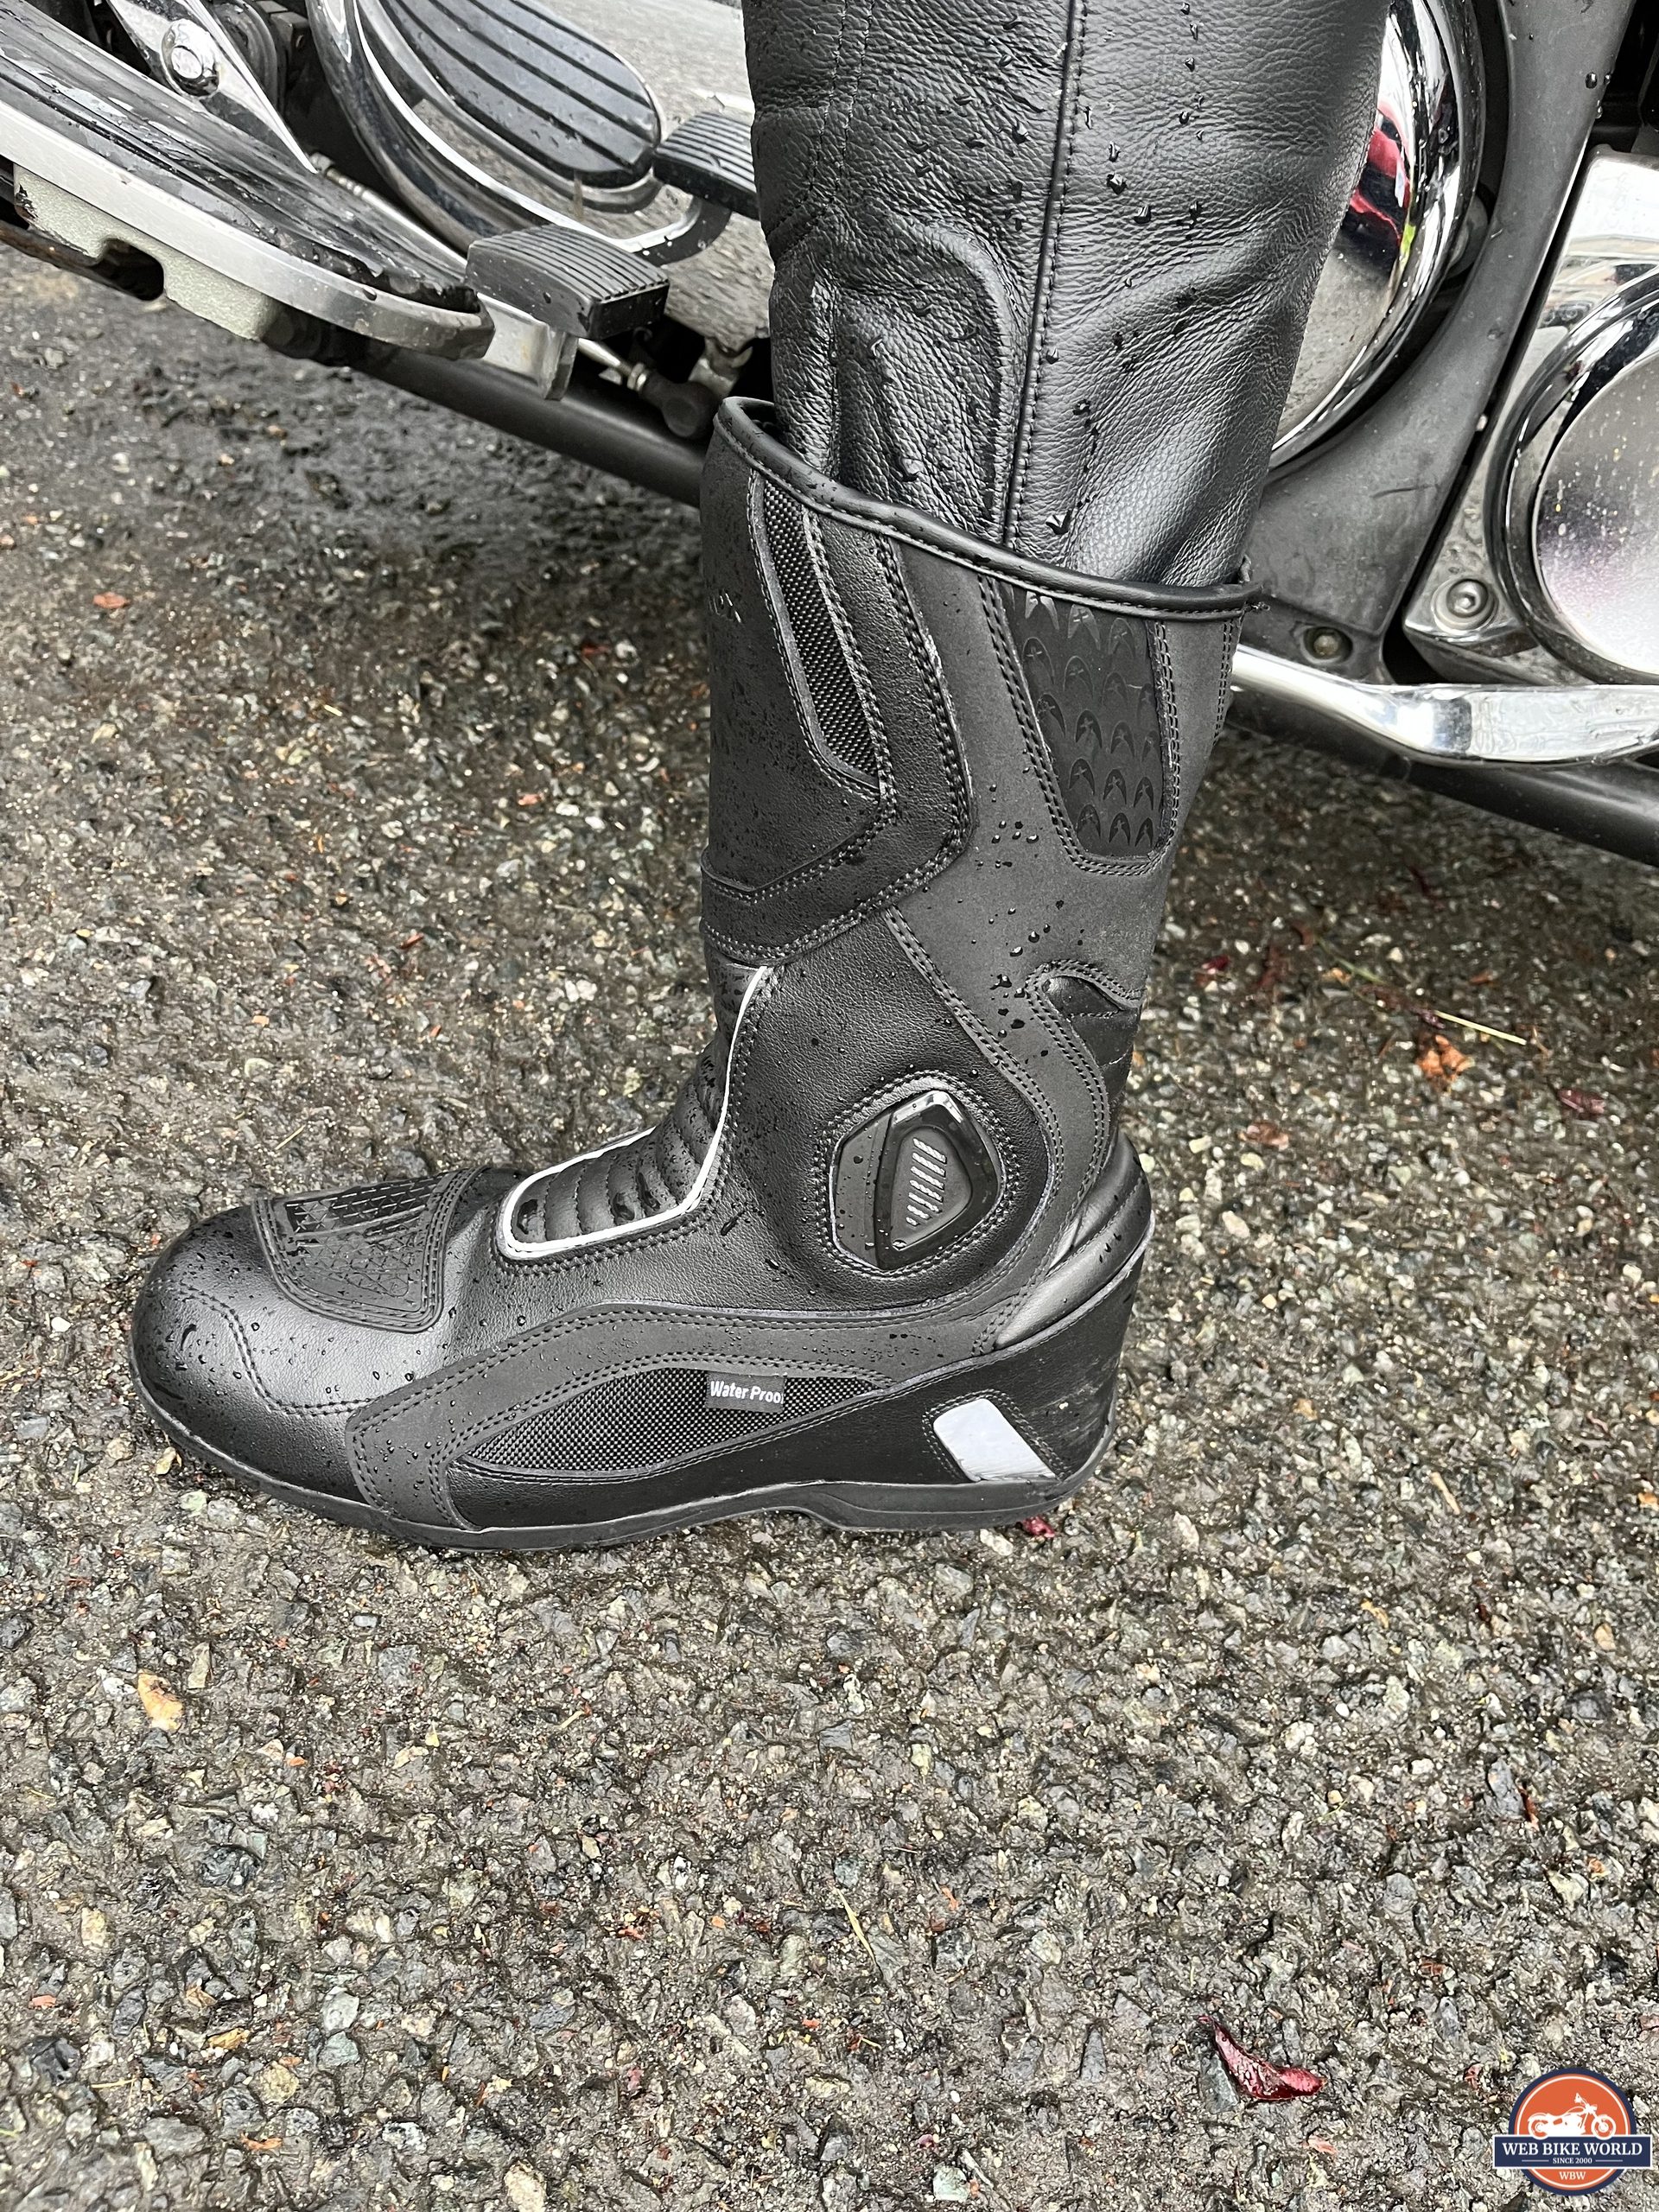 Wet Kronox Lanin Boot after rainy ride with ankle gap visible